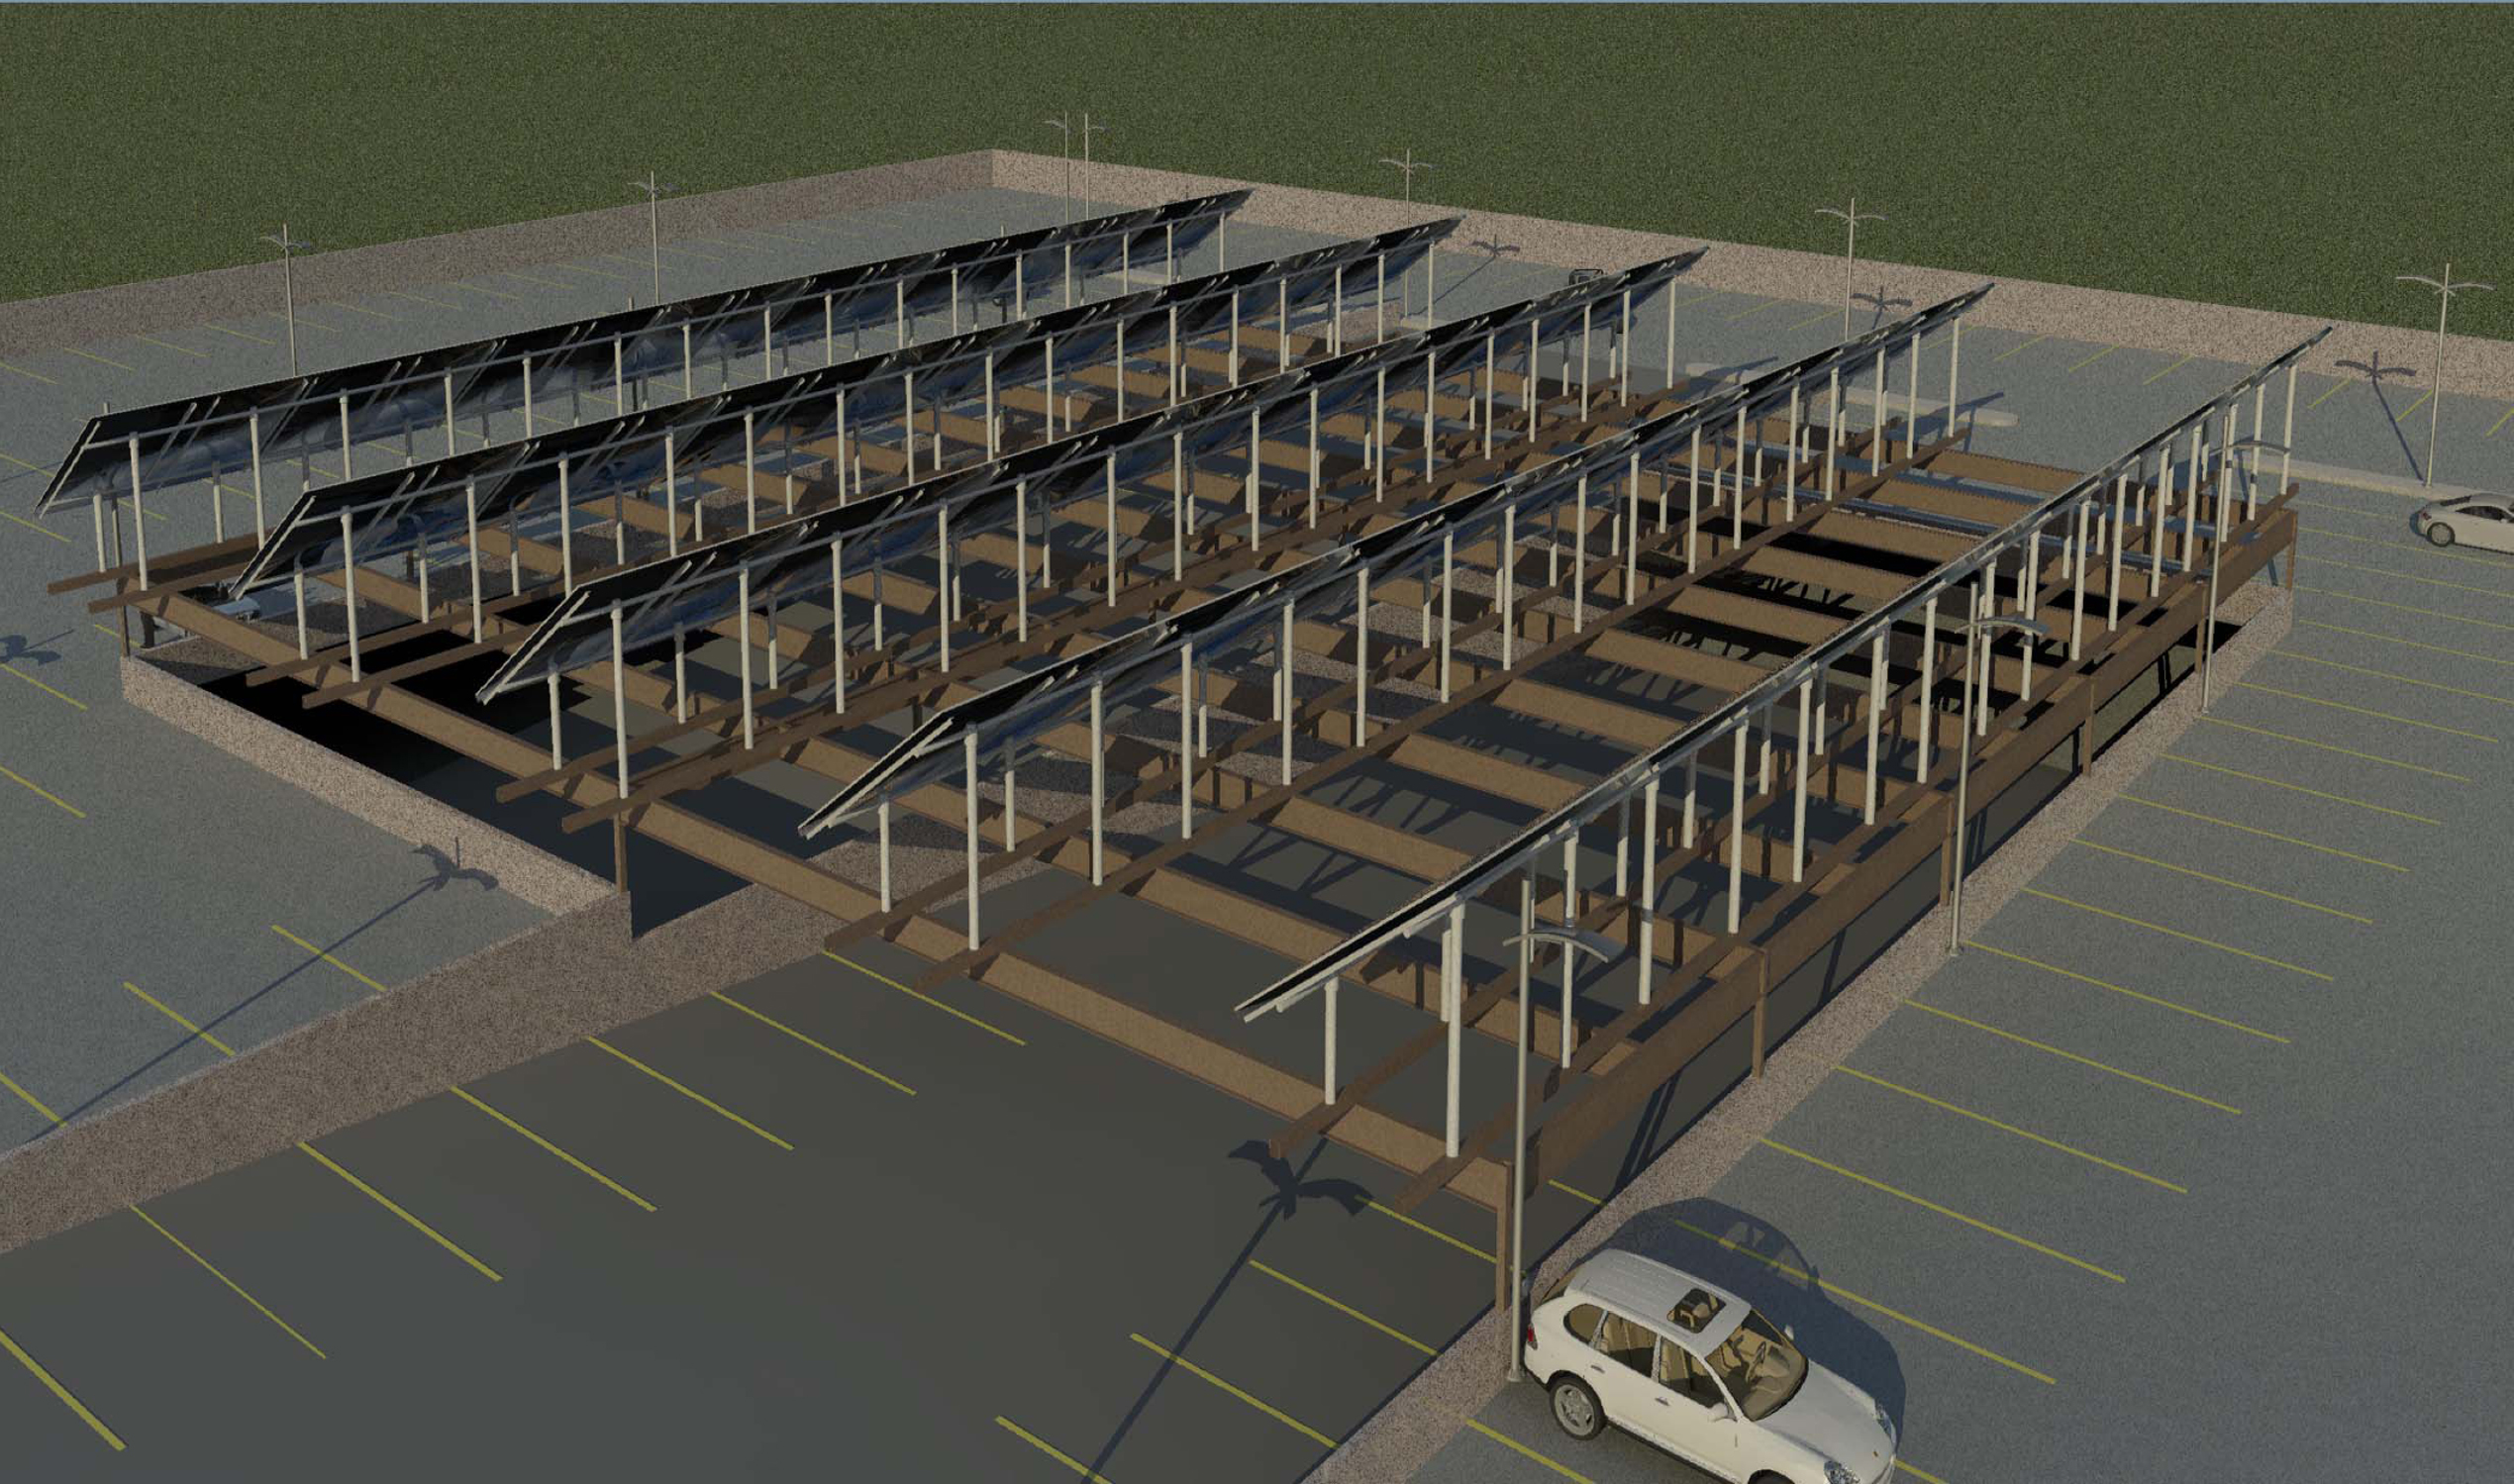 Architectural rendering of the parking deck's roof top solar panel field